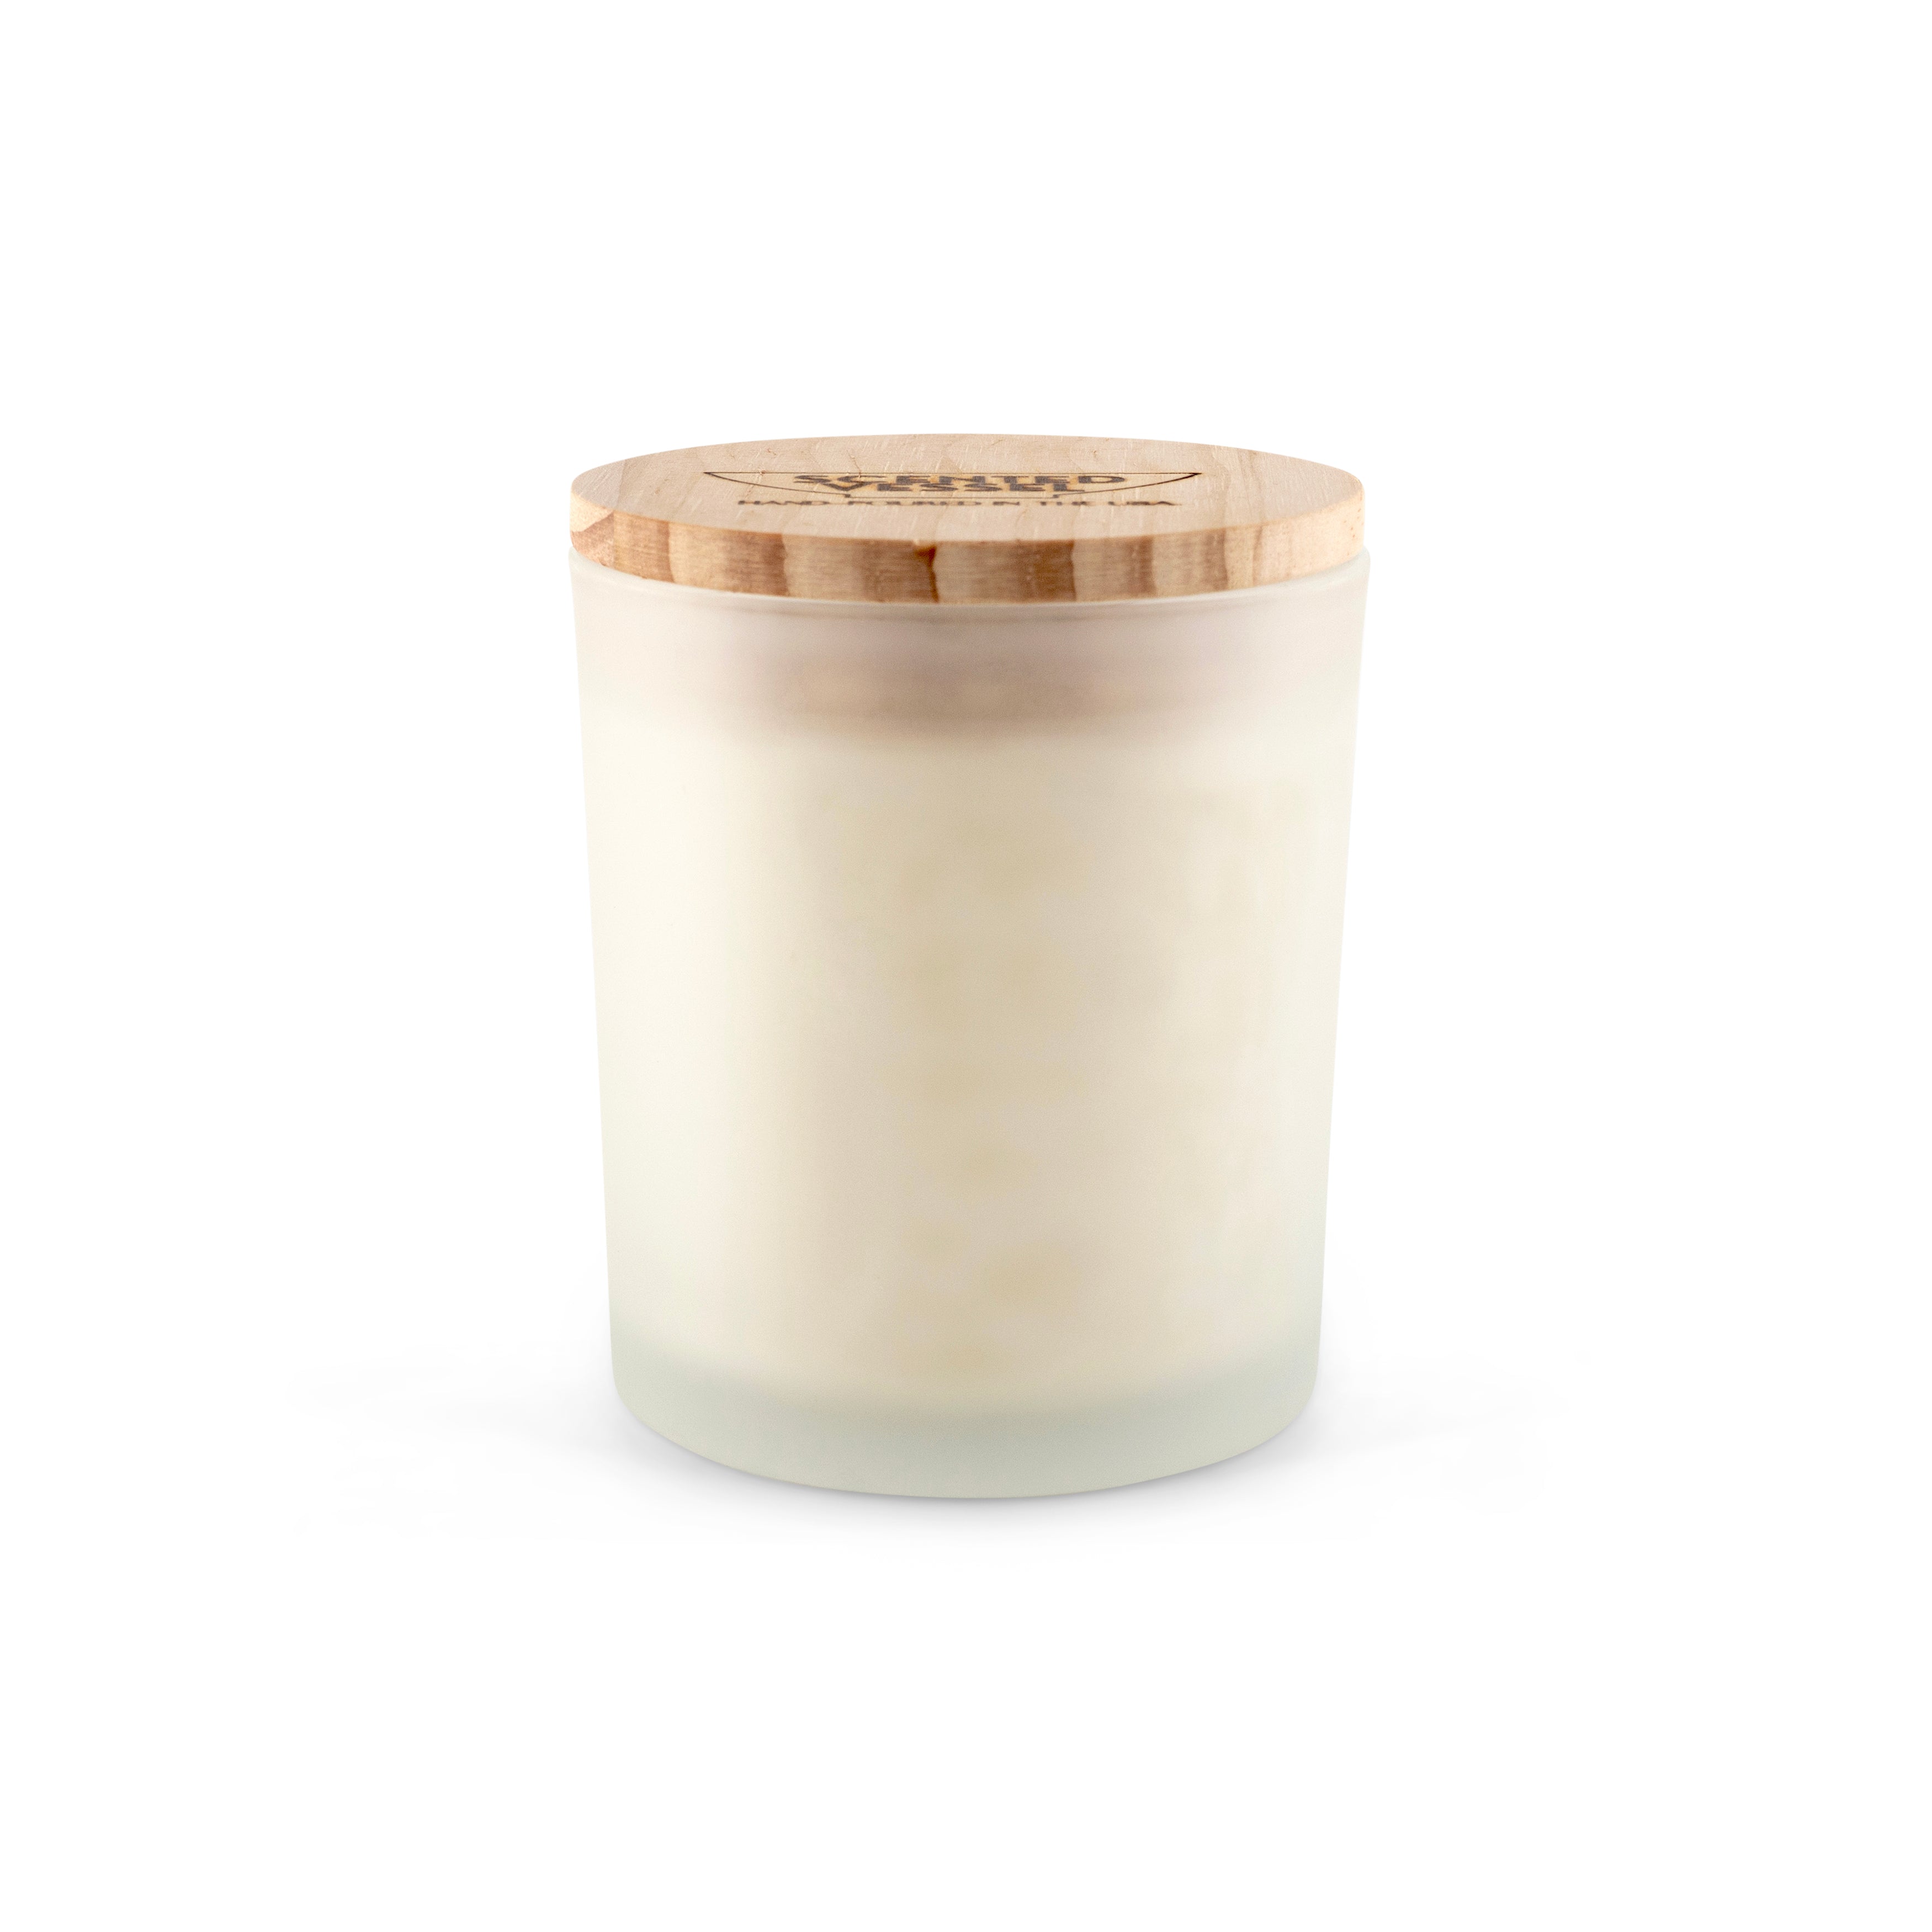 Buttercream & Cinnamon Scented Candle